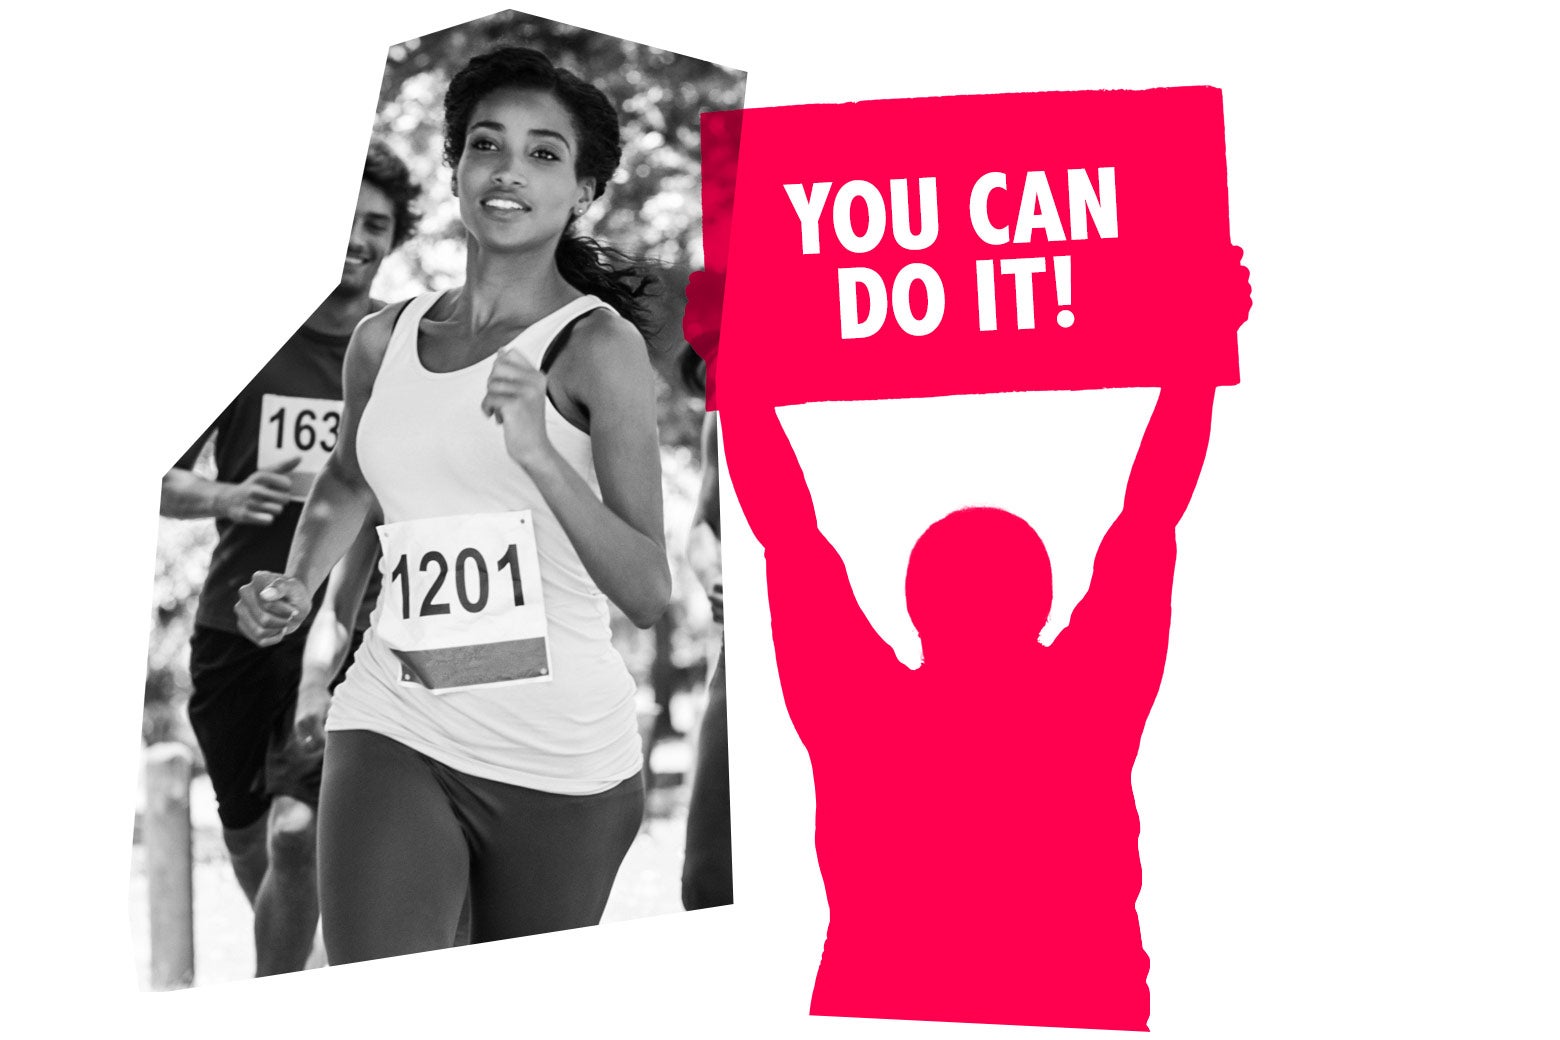 A marathon runner runs next to an illo of a person cheering her on with a sign reading "you can do it."